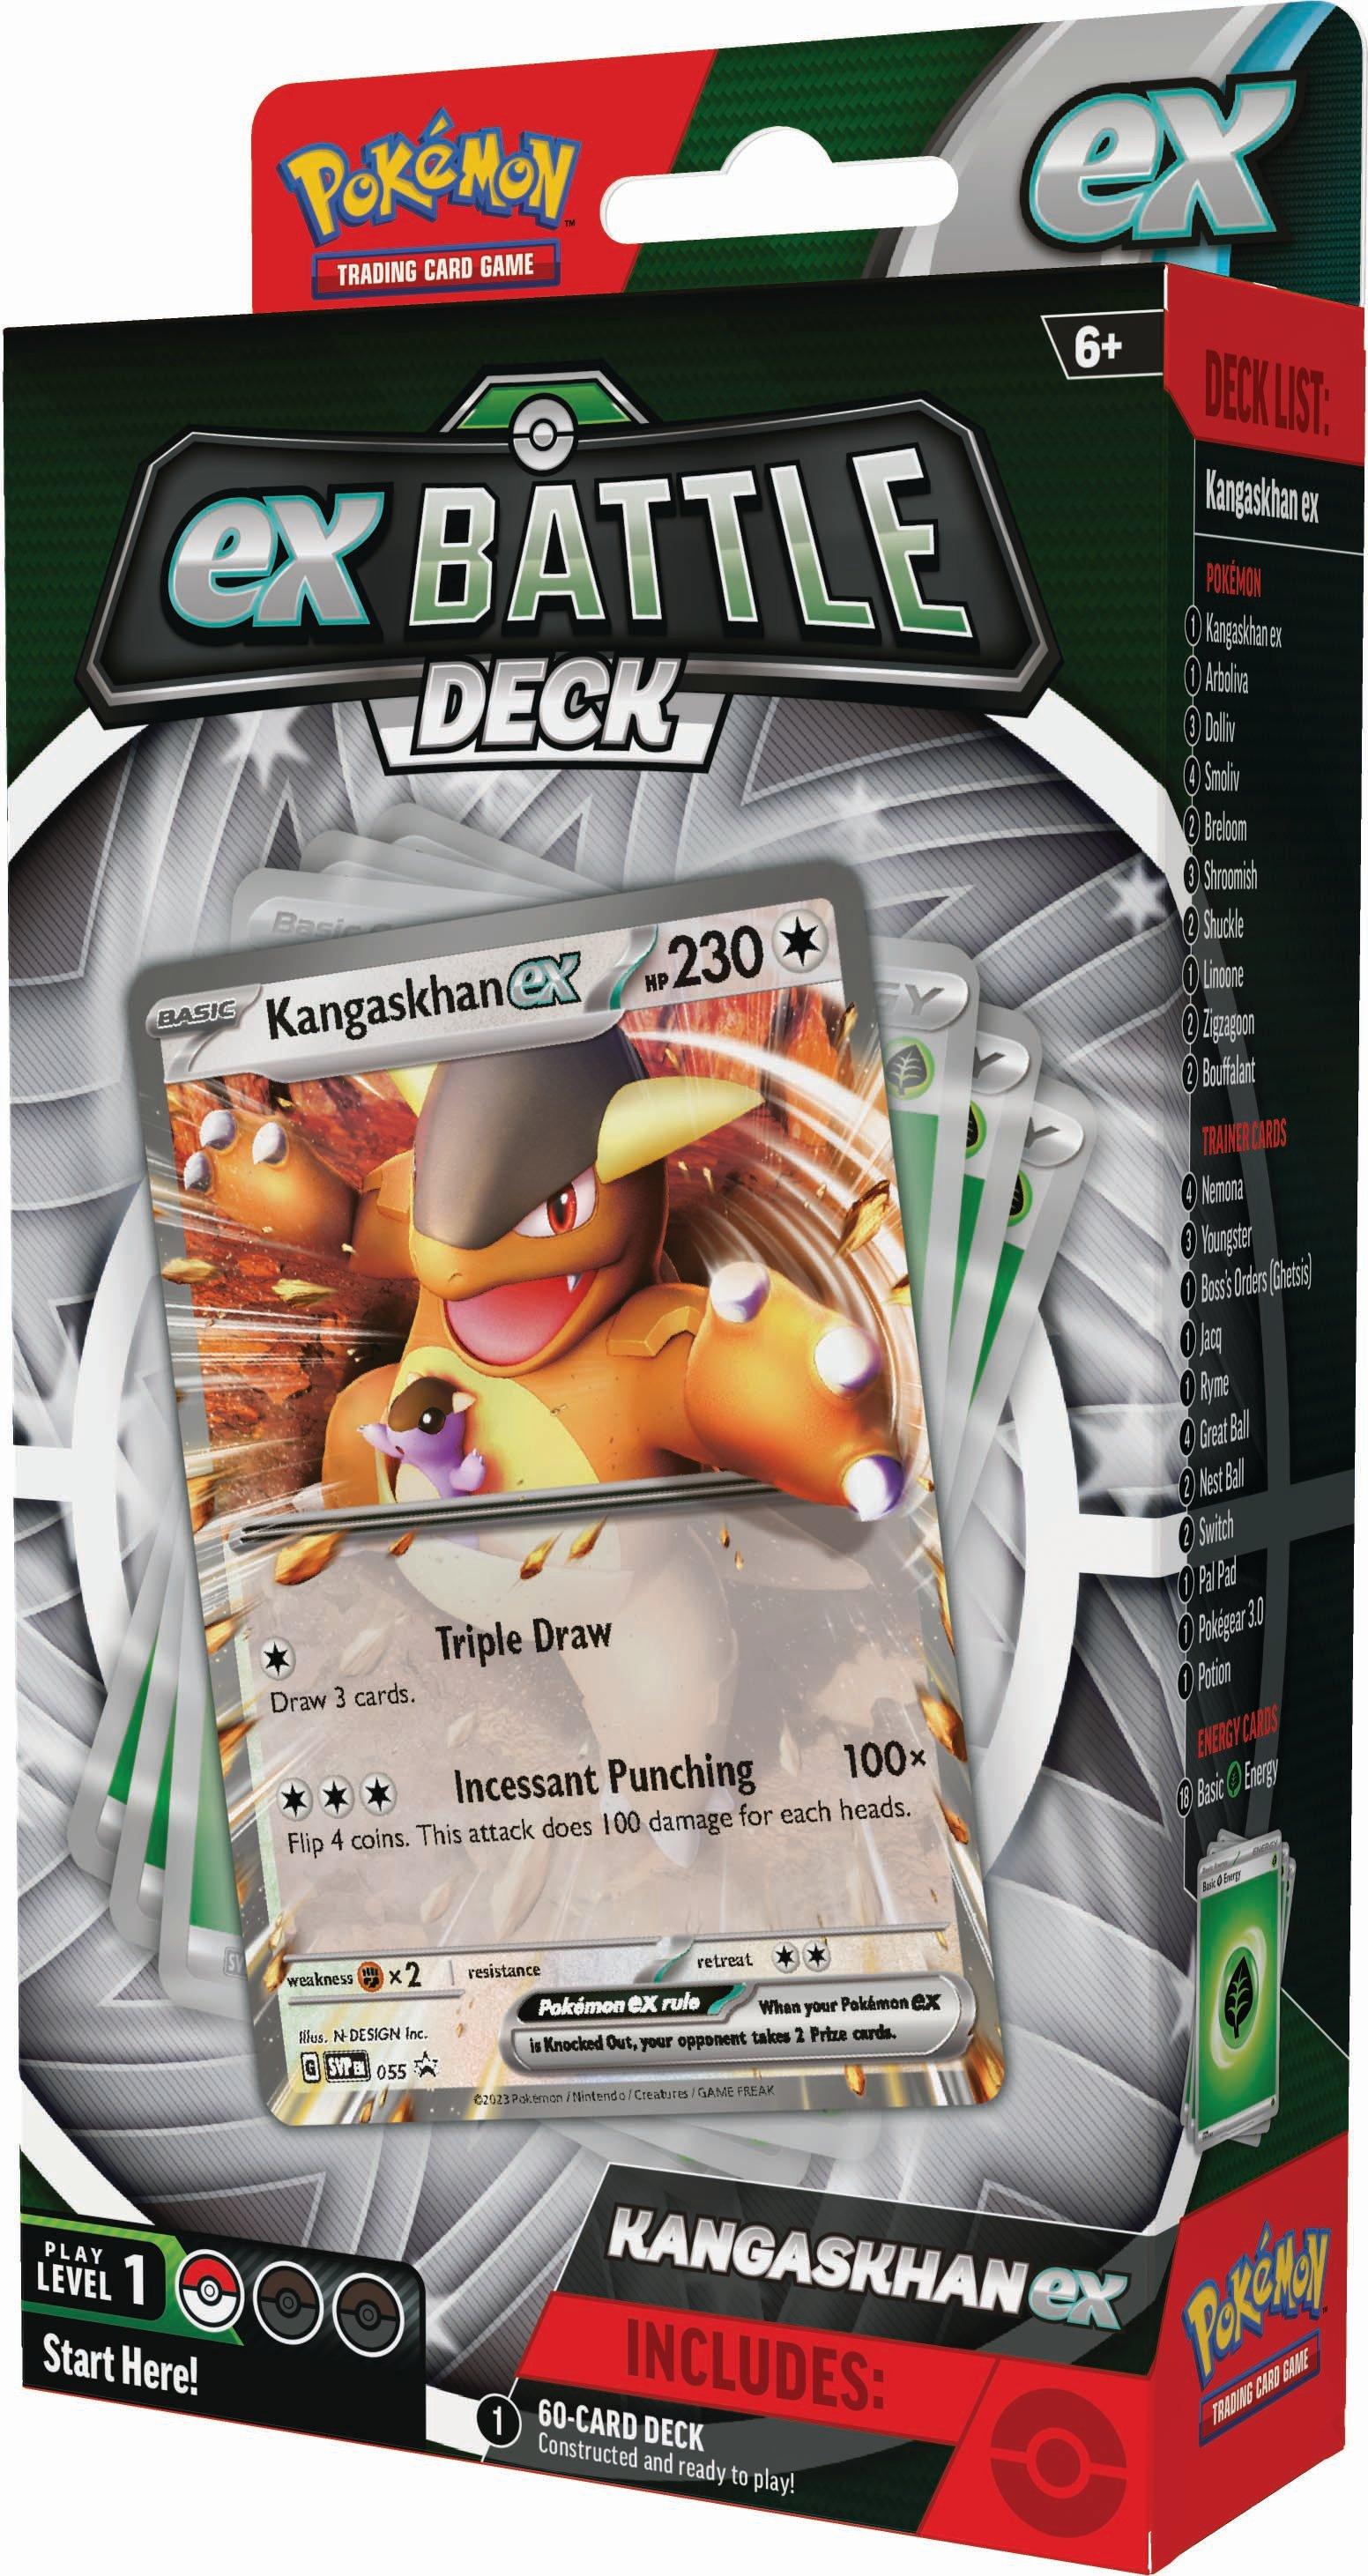 NEW POKEMON CARDS ARE HERE!* Opening Kangaskhan GX Collection Box from  GAMESTOP! 